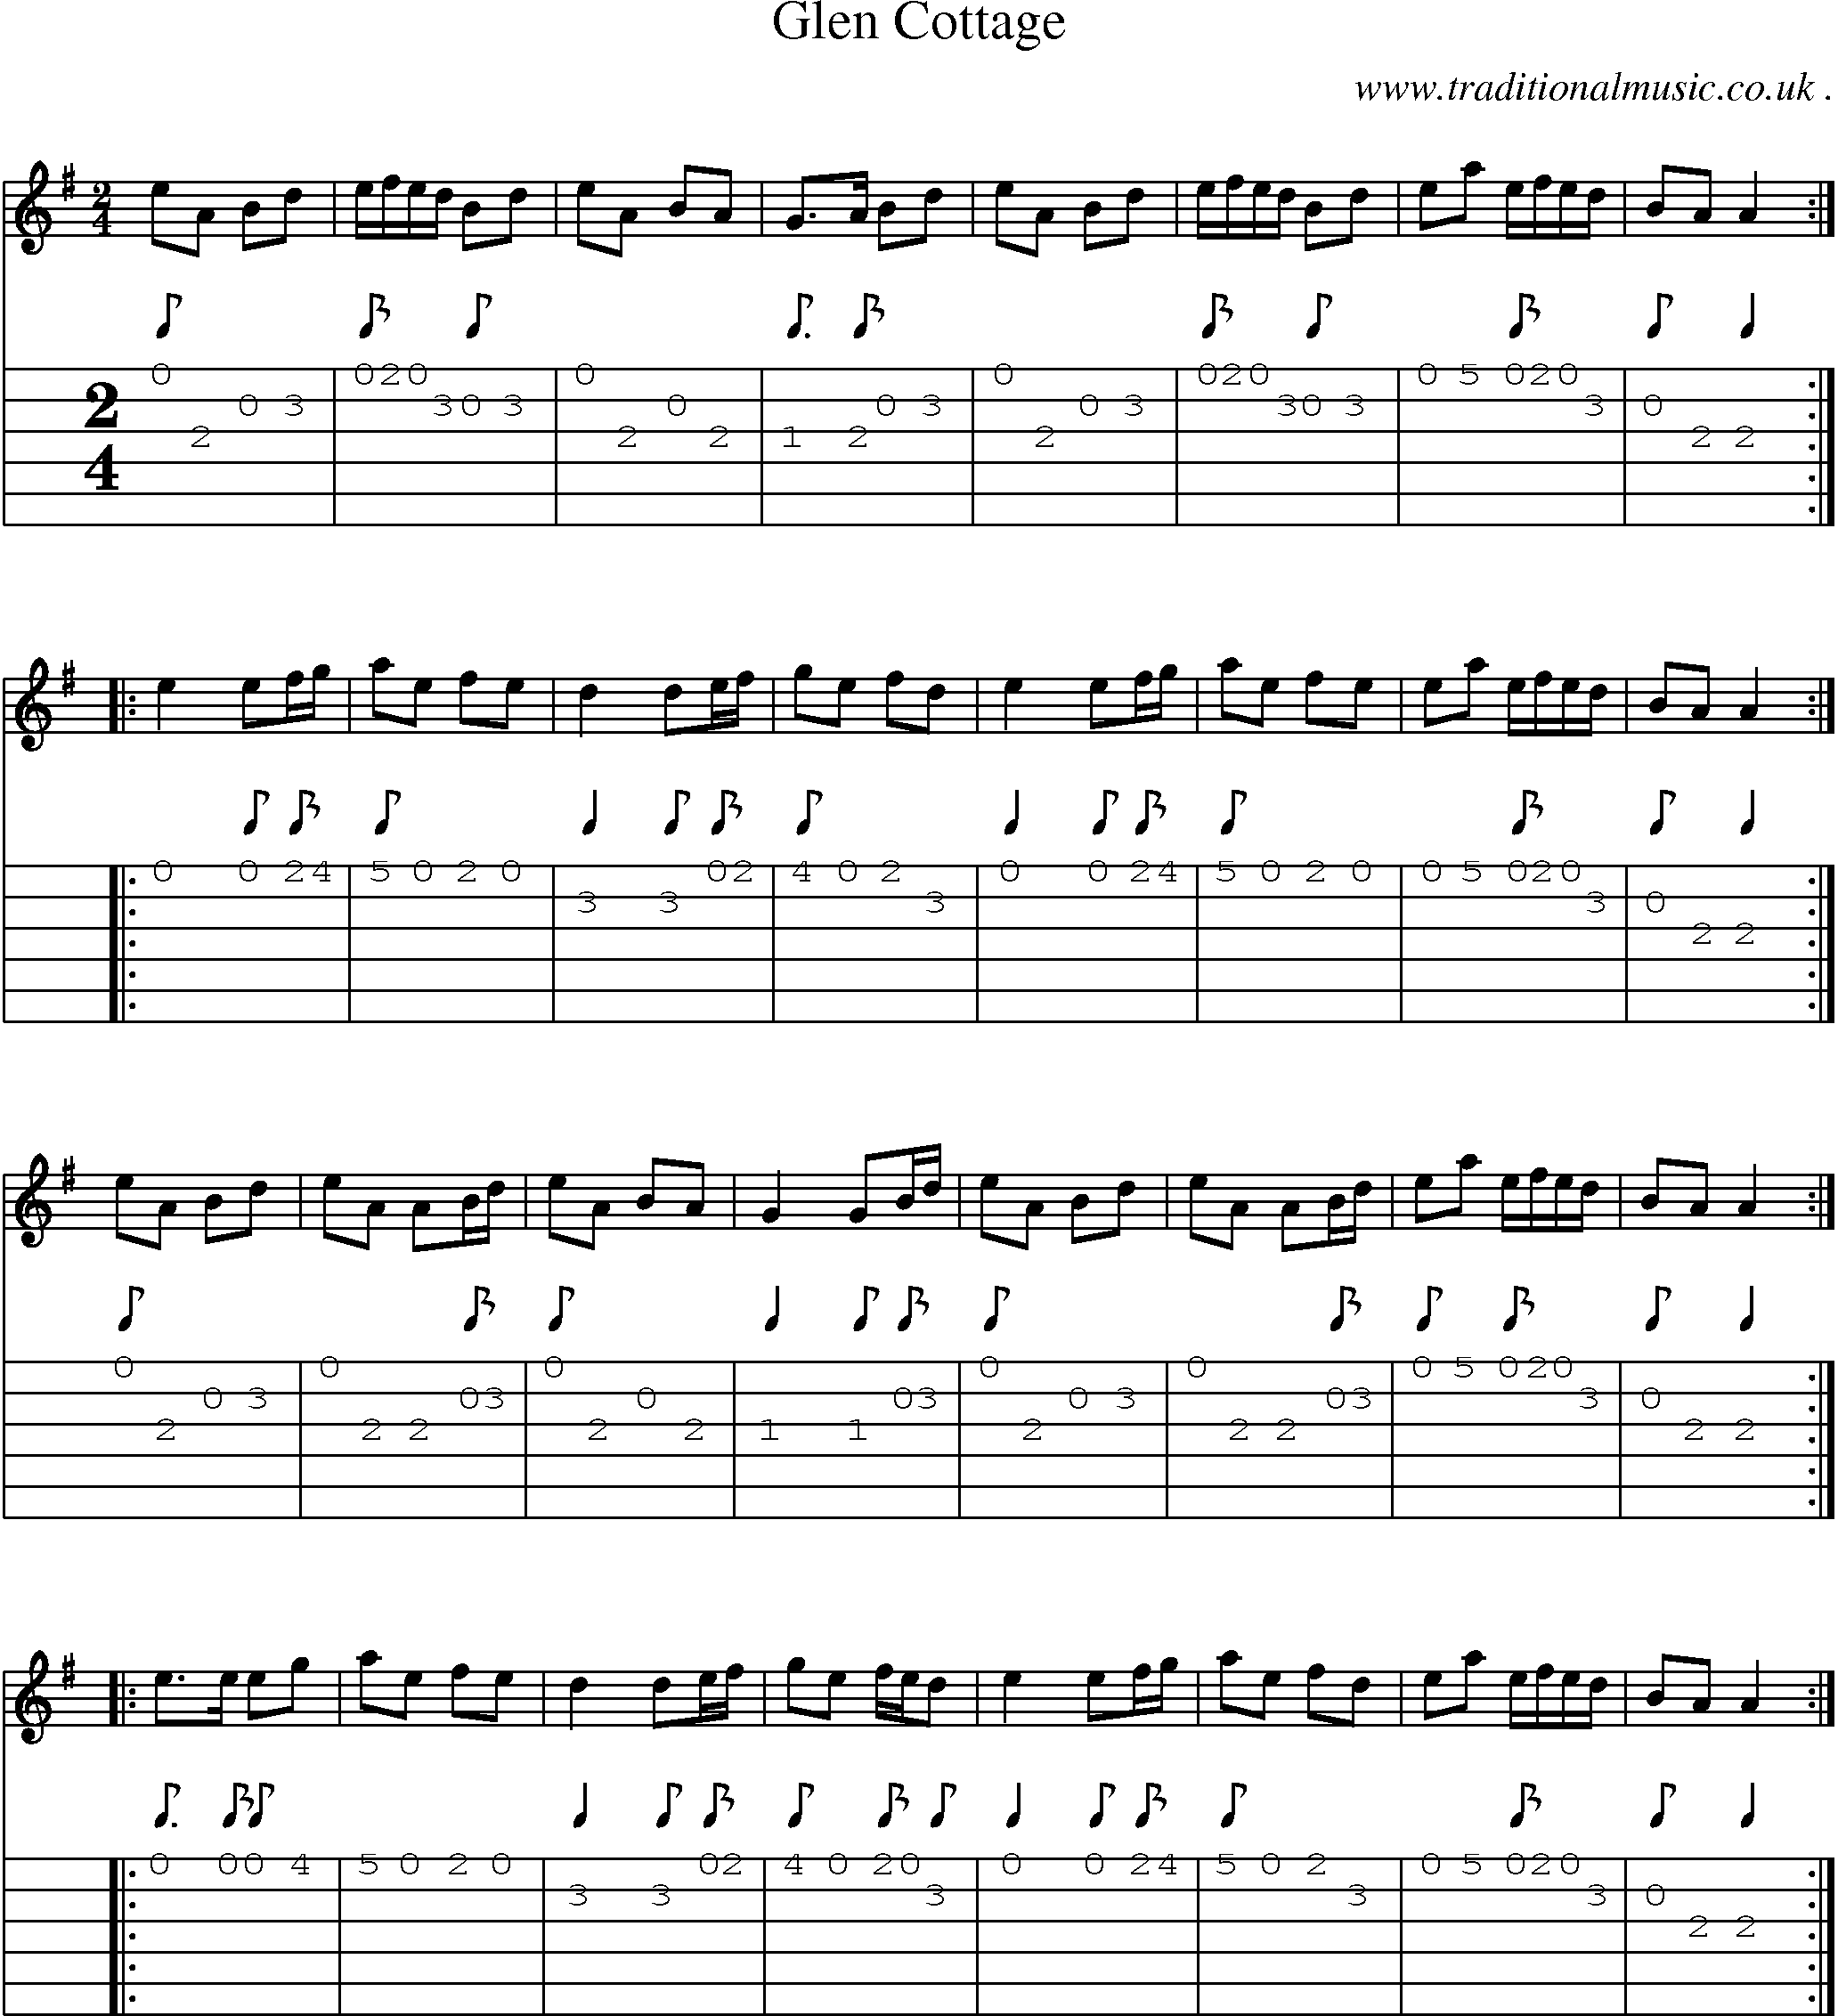 Sheet-Music and Guitar Tabs for Glen Cottage